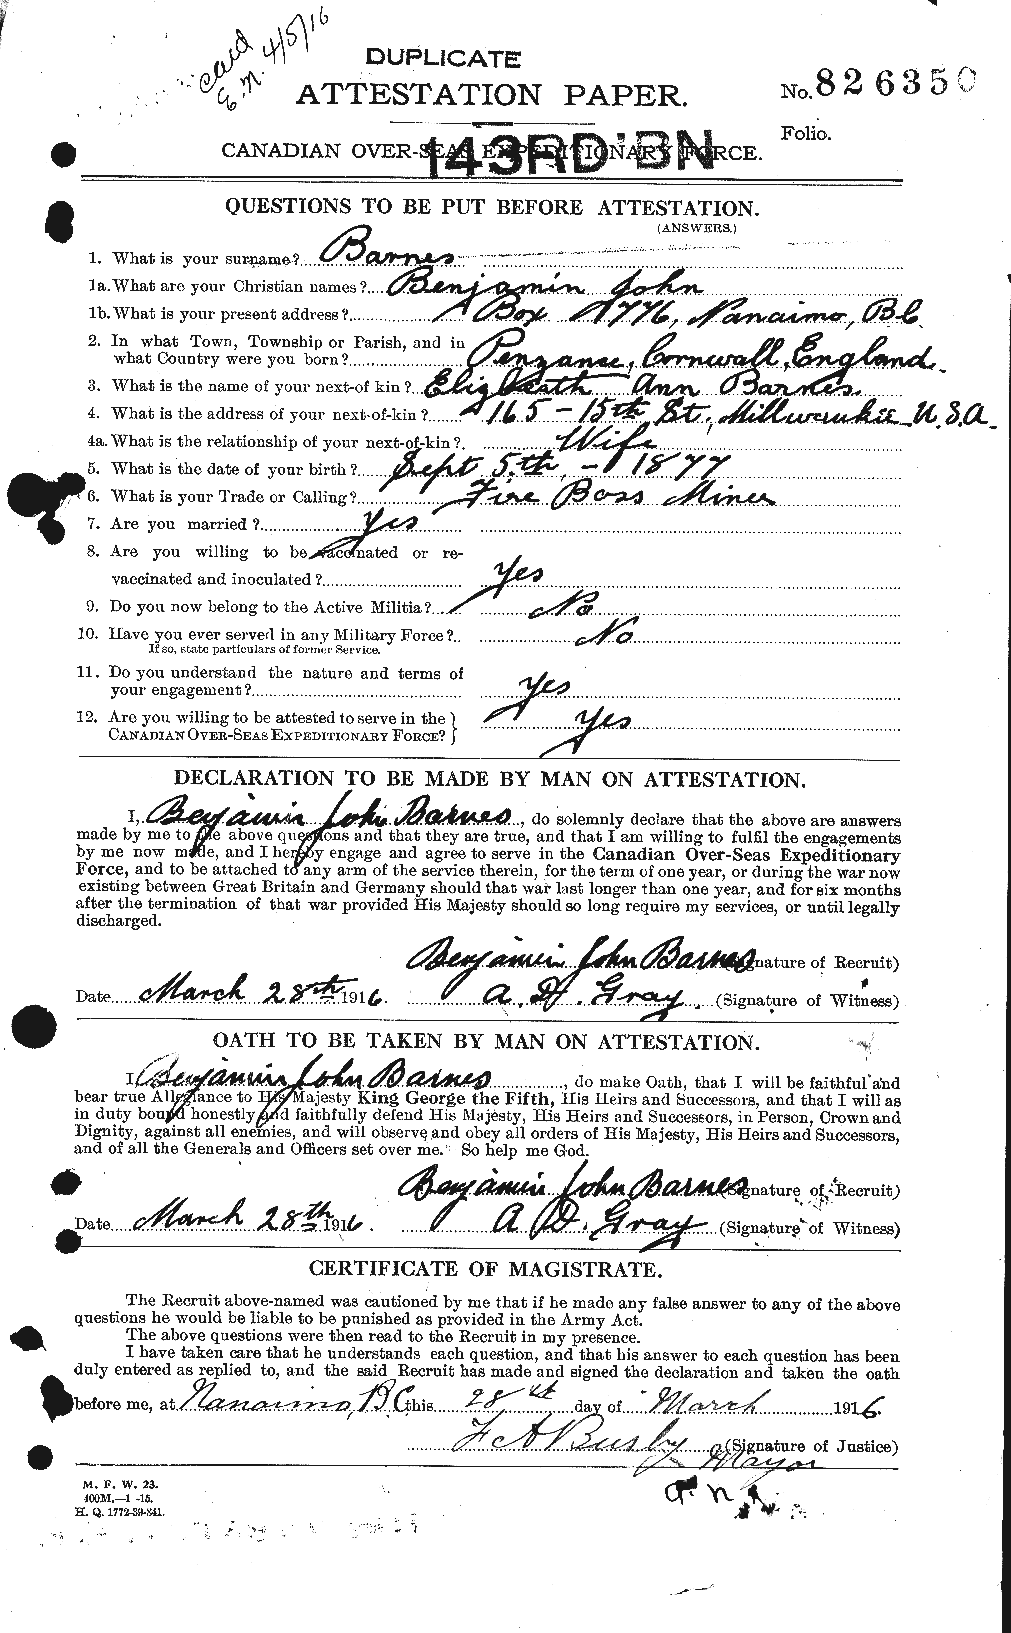 Personnel Records of the First World War - CEF 222643a